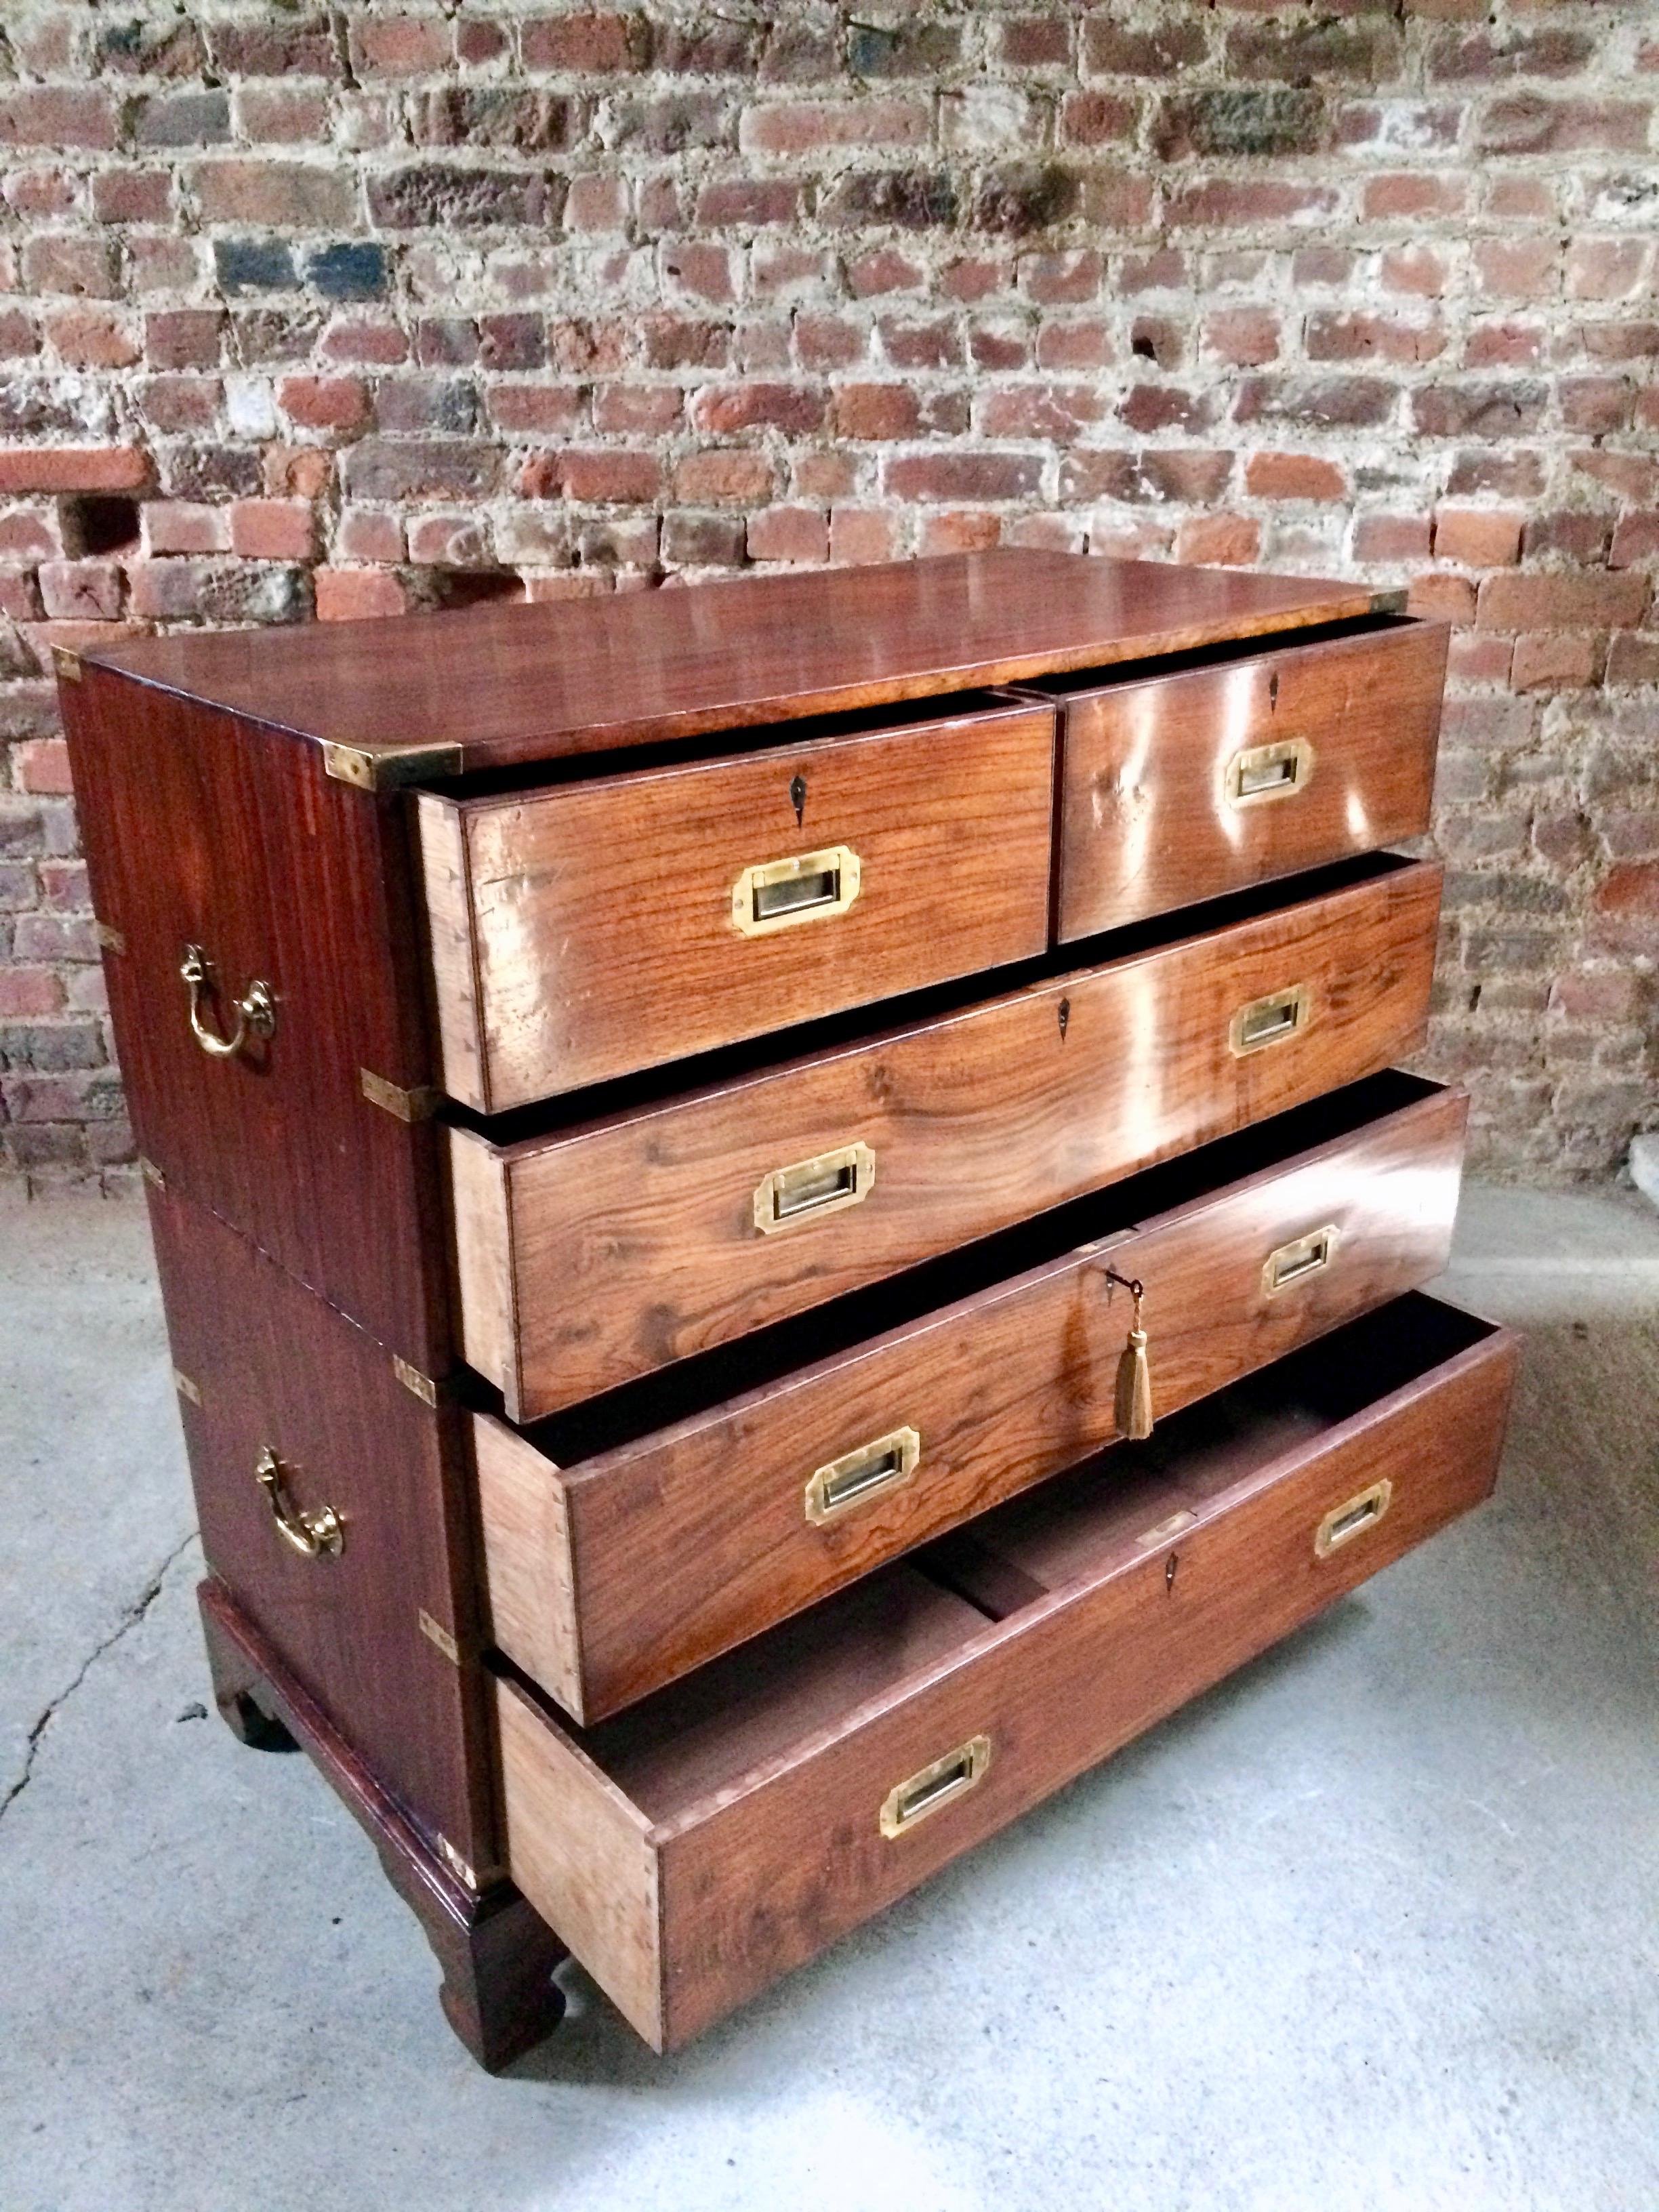 Mid-19th Century Antique Campaign Chest of Drawers Dresser Mahogany circa 1860 Victorian No.4